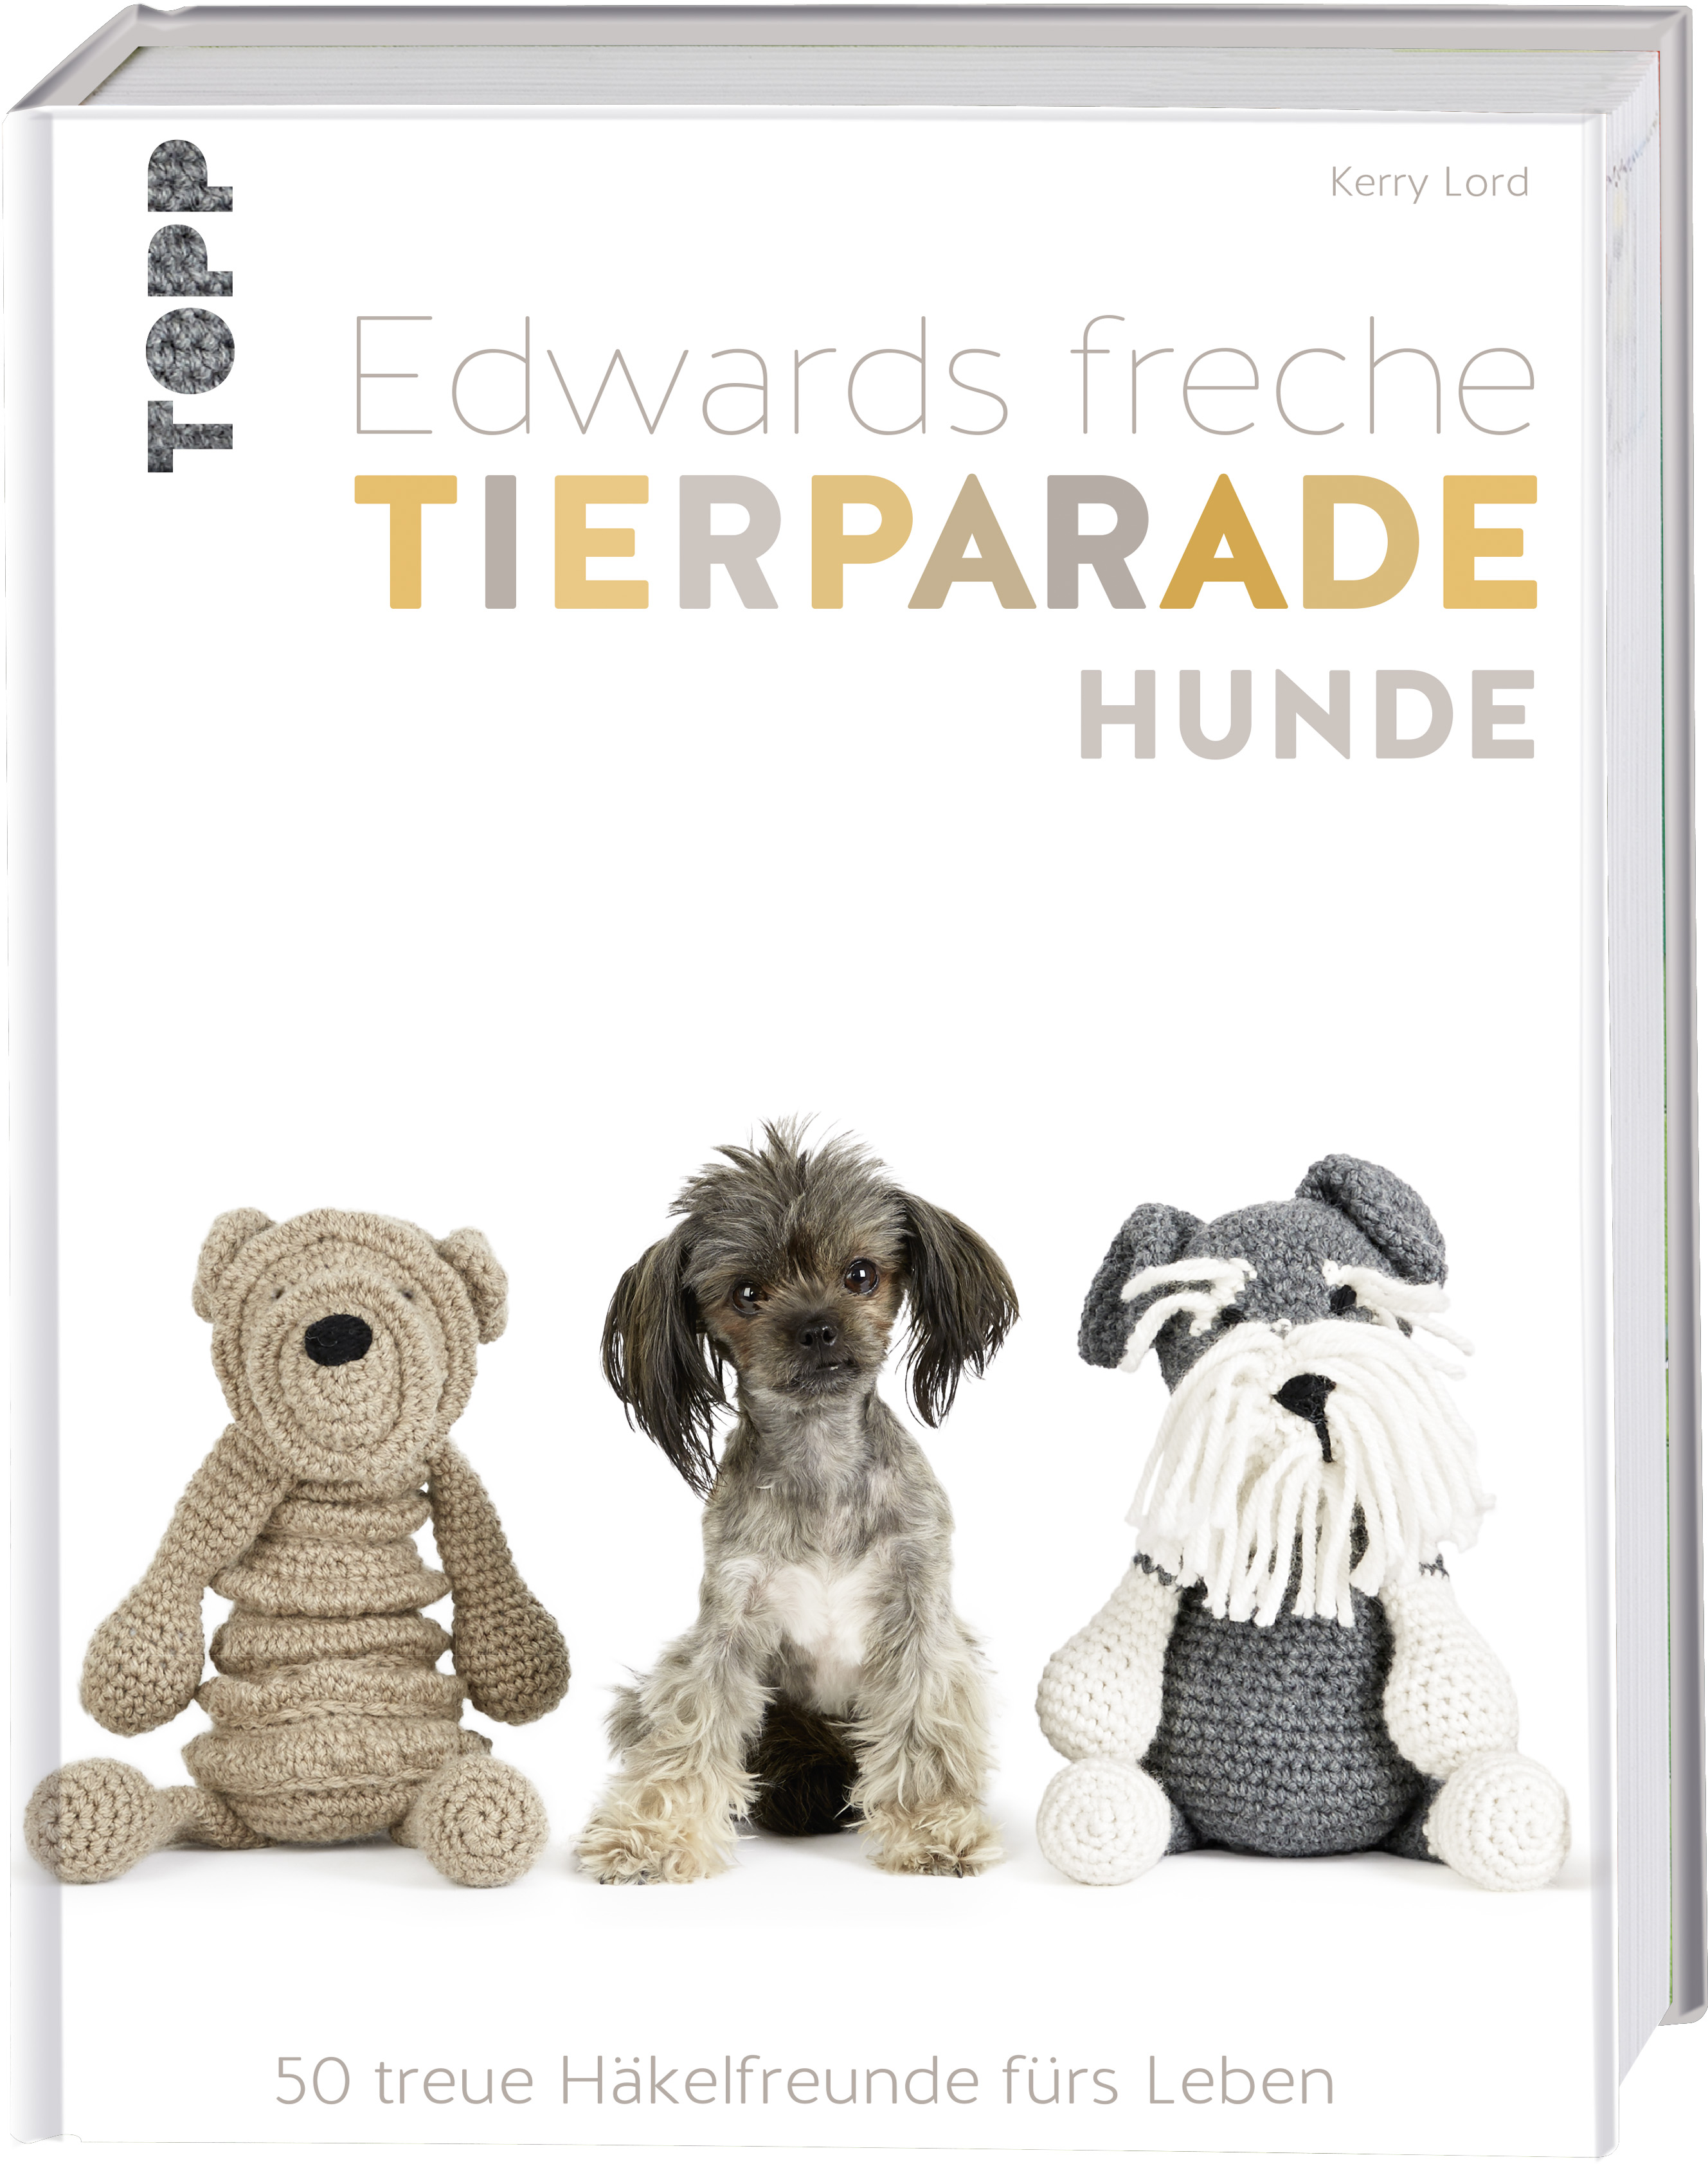 Edwards freche Tierparade Hunde (Kerry Lord)